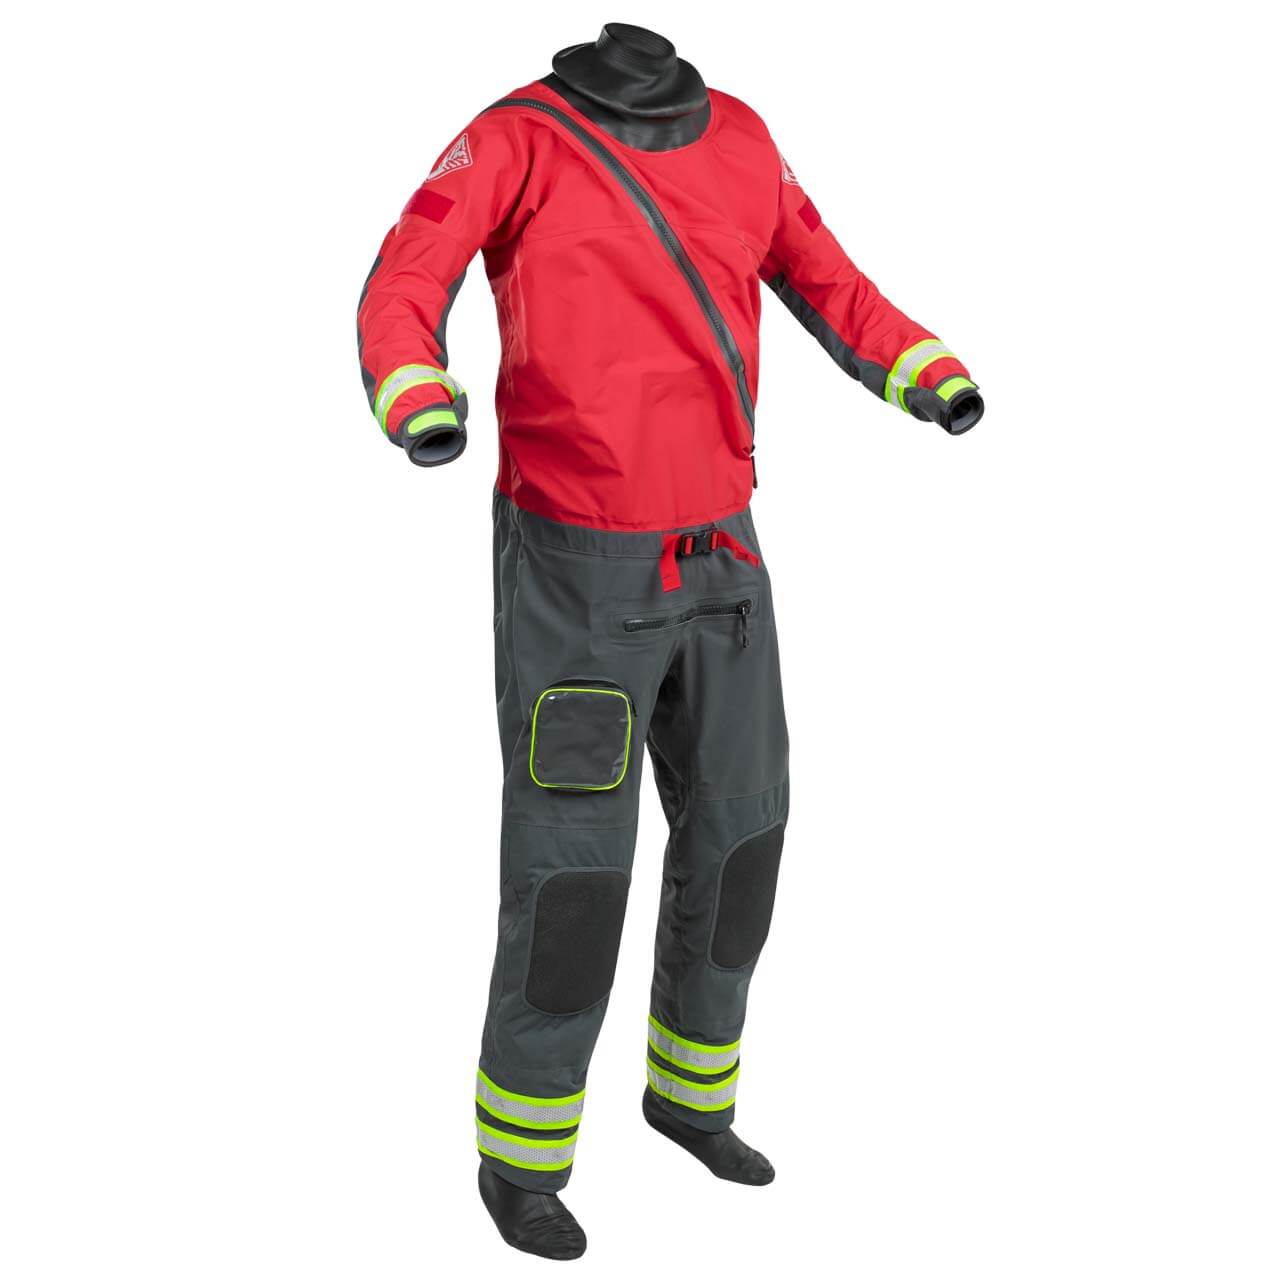 Palm Rescue Dry Suit - Red/Jet Grey, MB von Palm Equipment